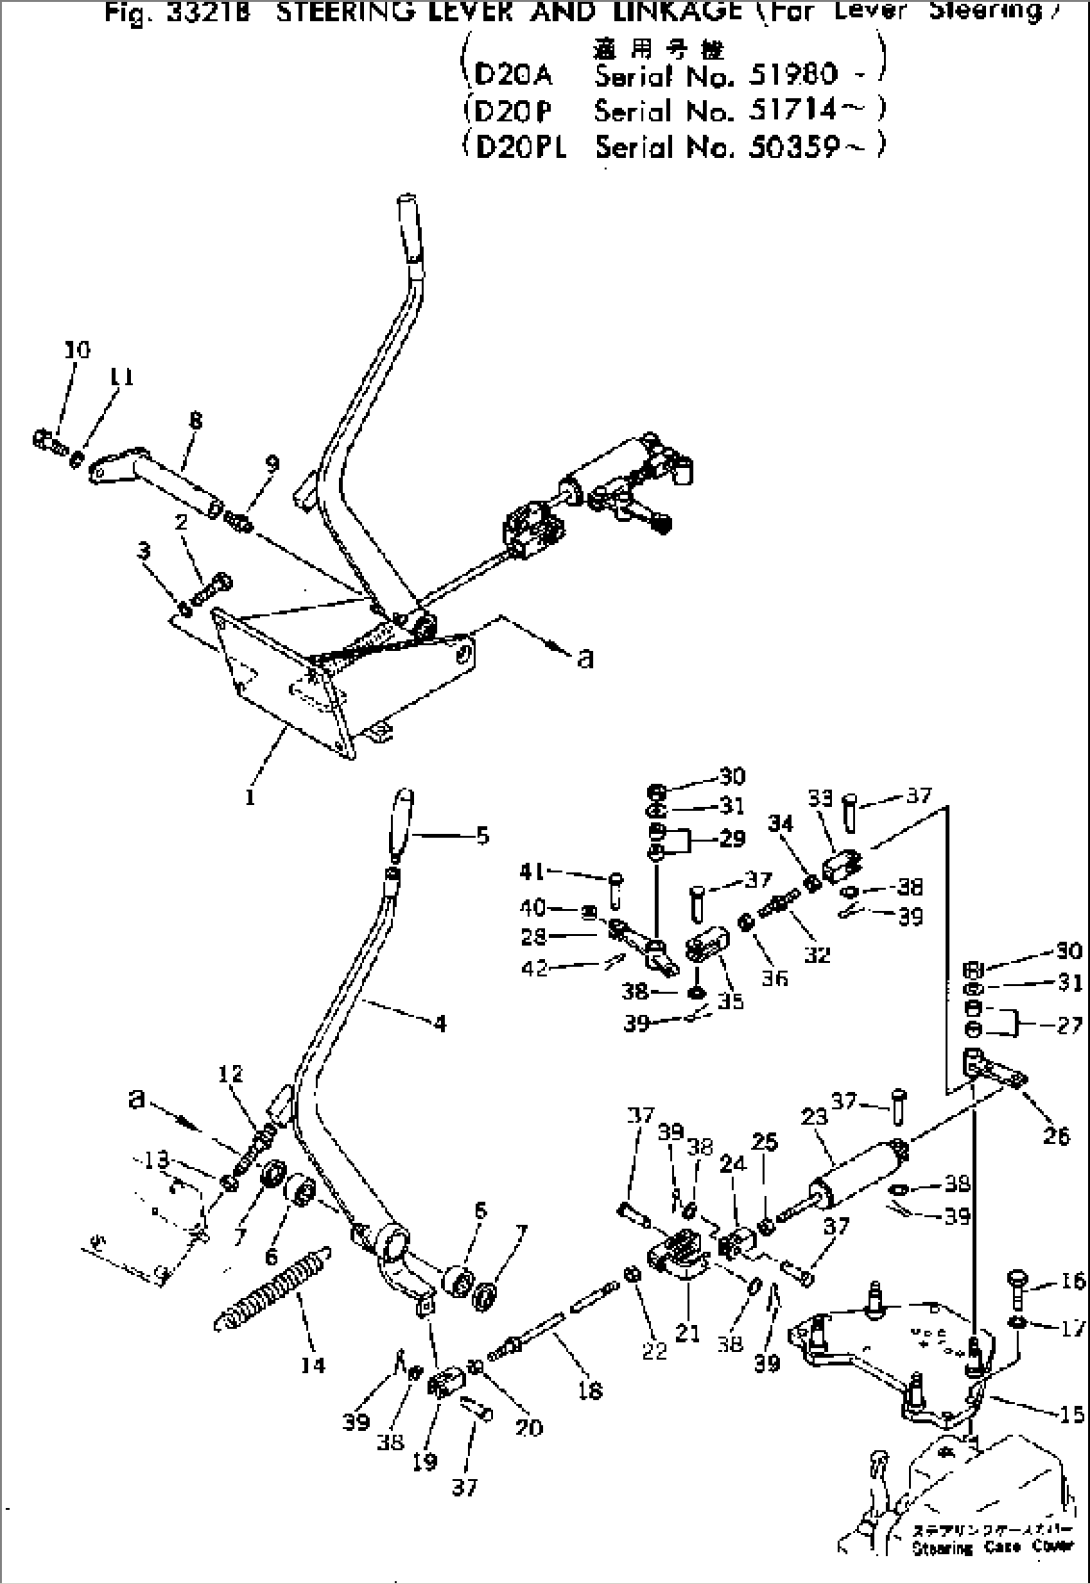 STEERING LEVER AND LINKAGE (FOR LEVER STEERING)(#51980-)